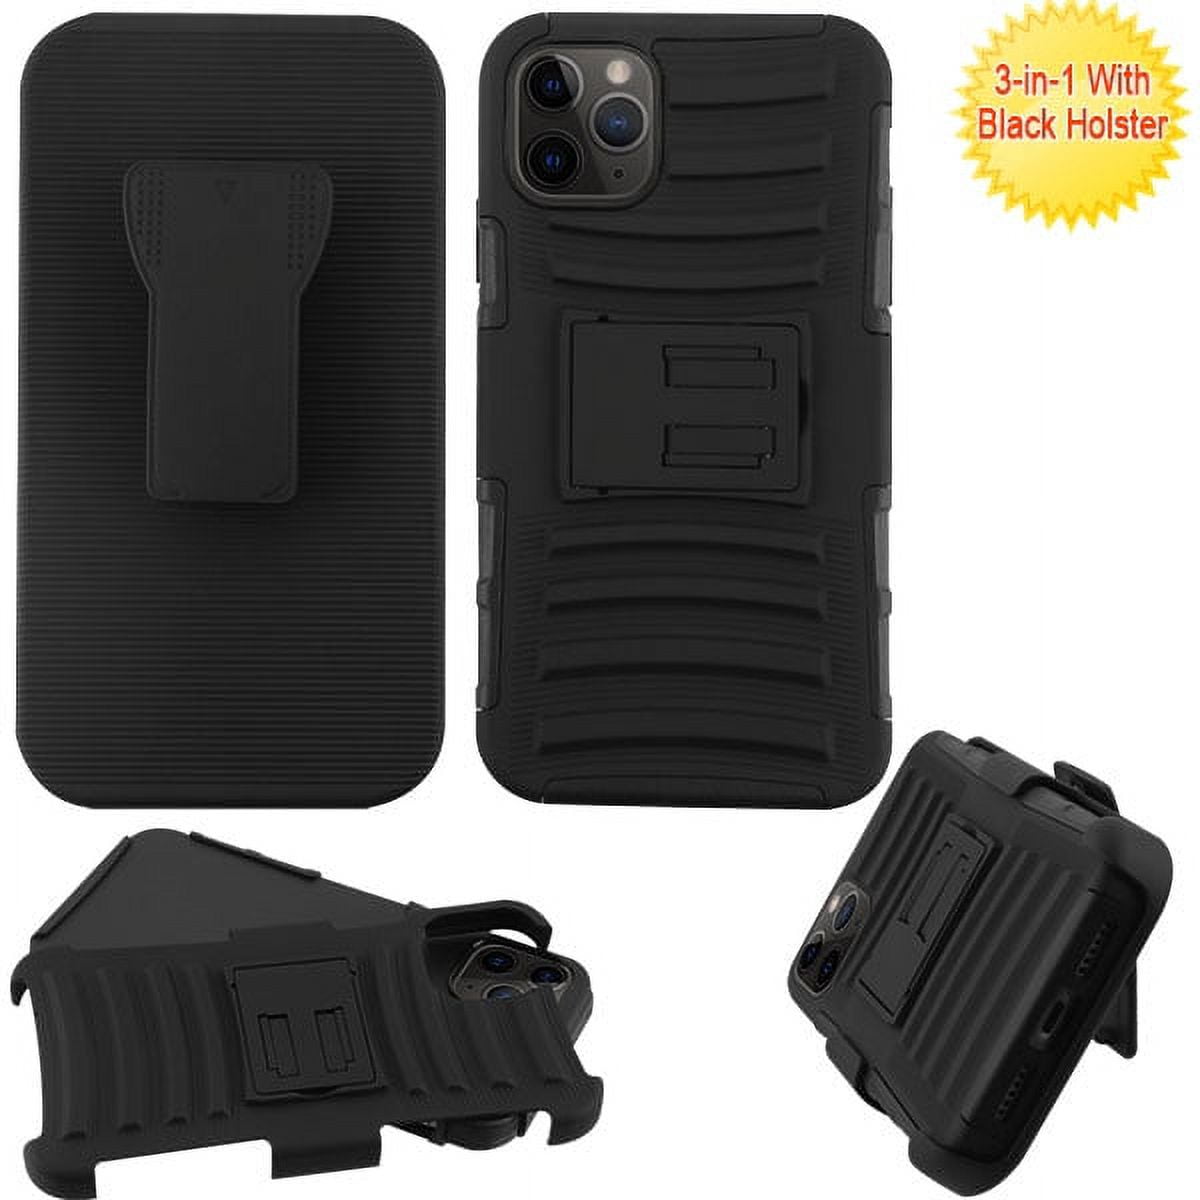 Punkcase iPhone 11 Pro Max Case with Tempered Glass Screen Protector, Holster Belt Clip & Built-In Kickstand [Black]